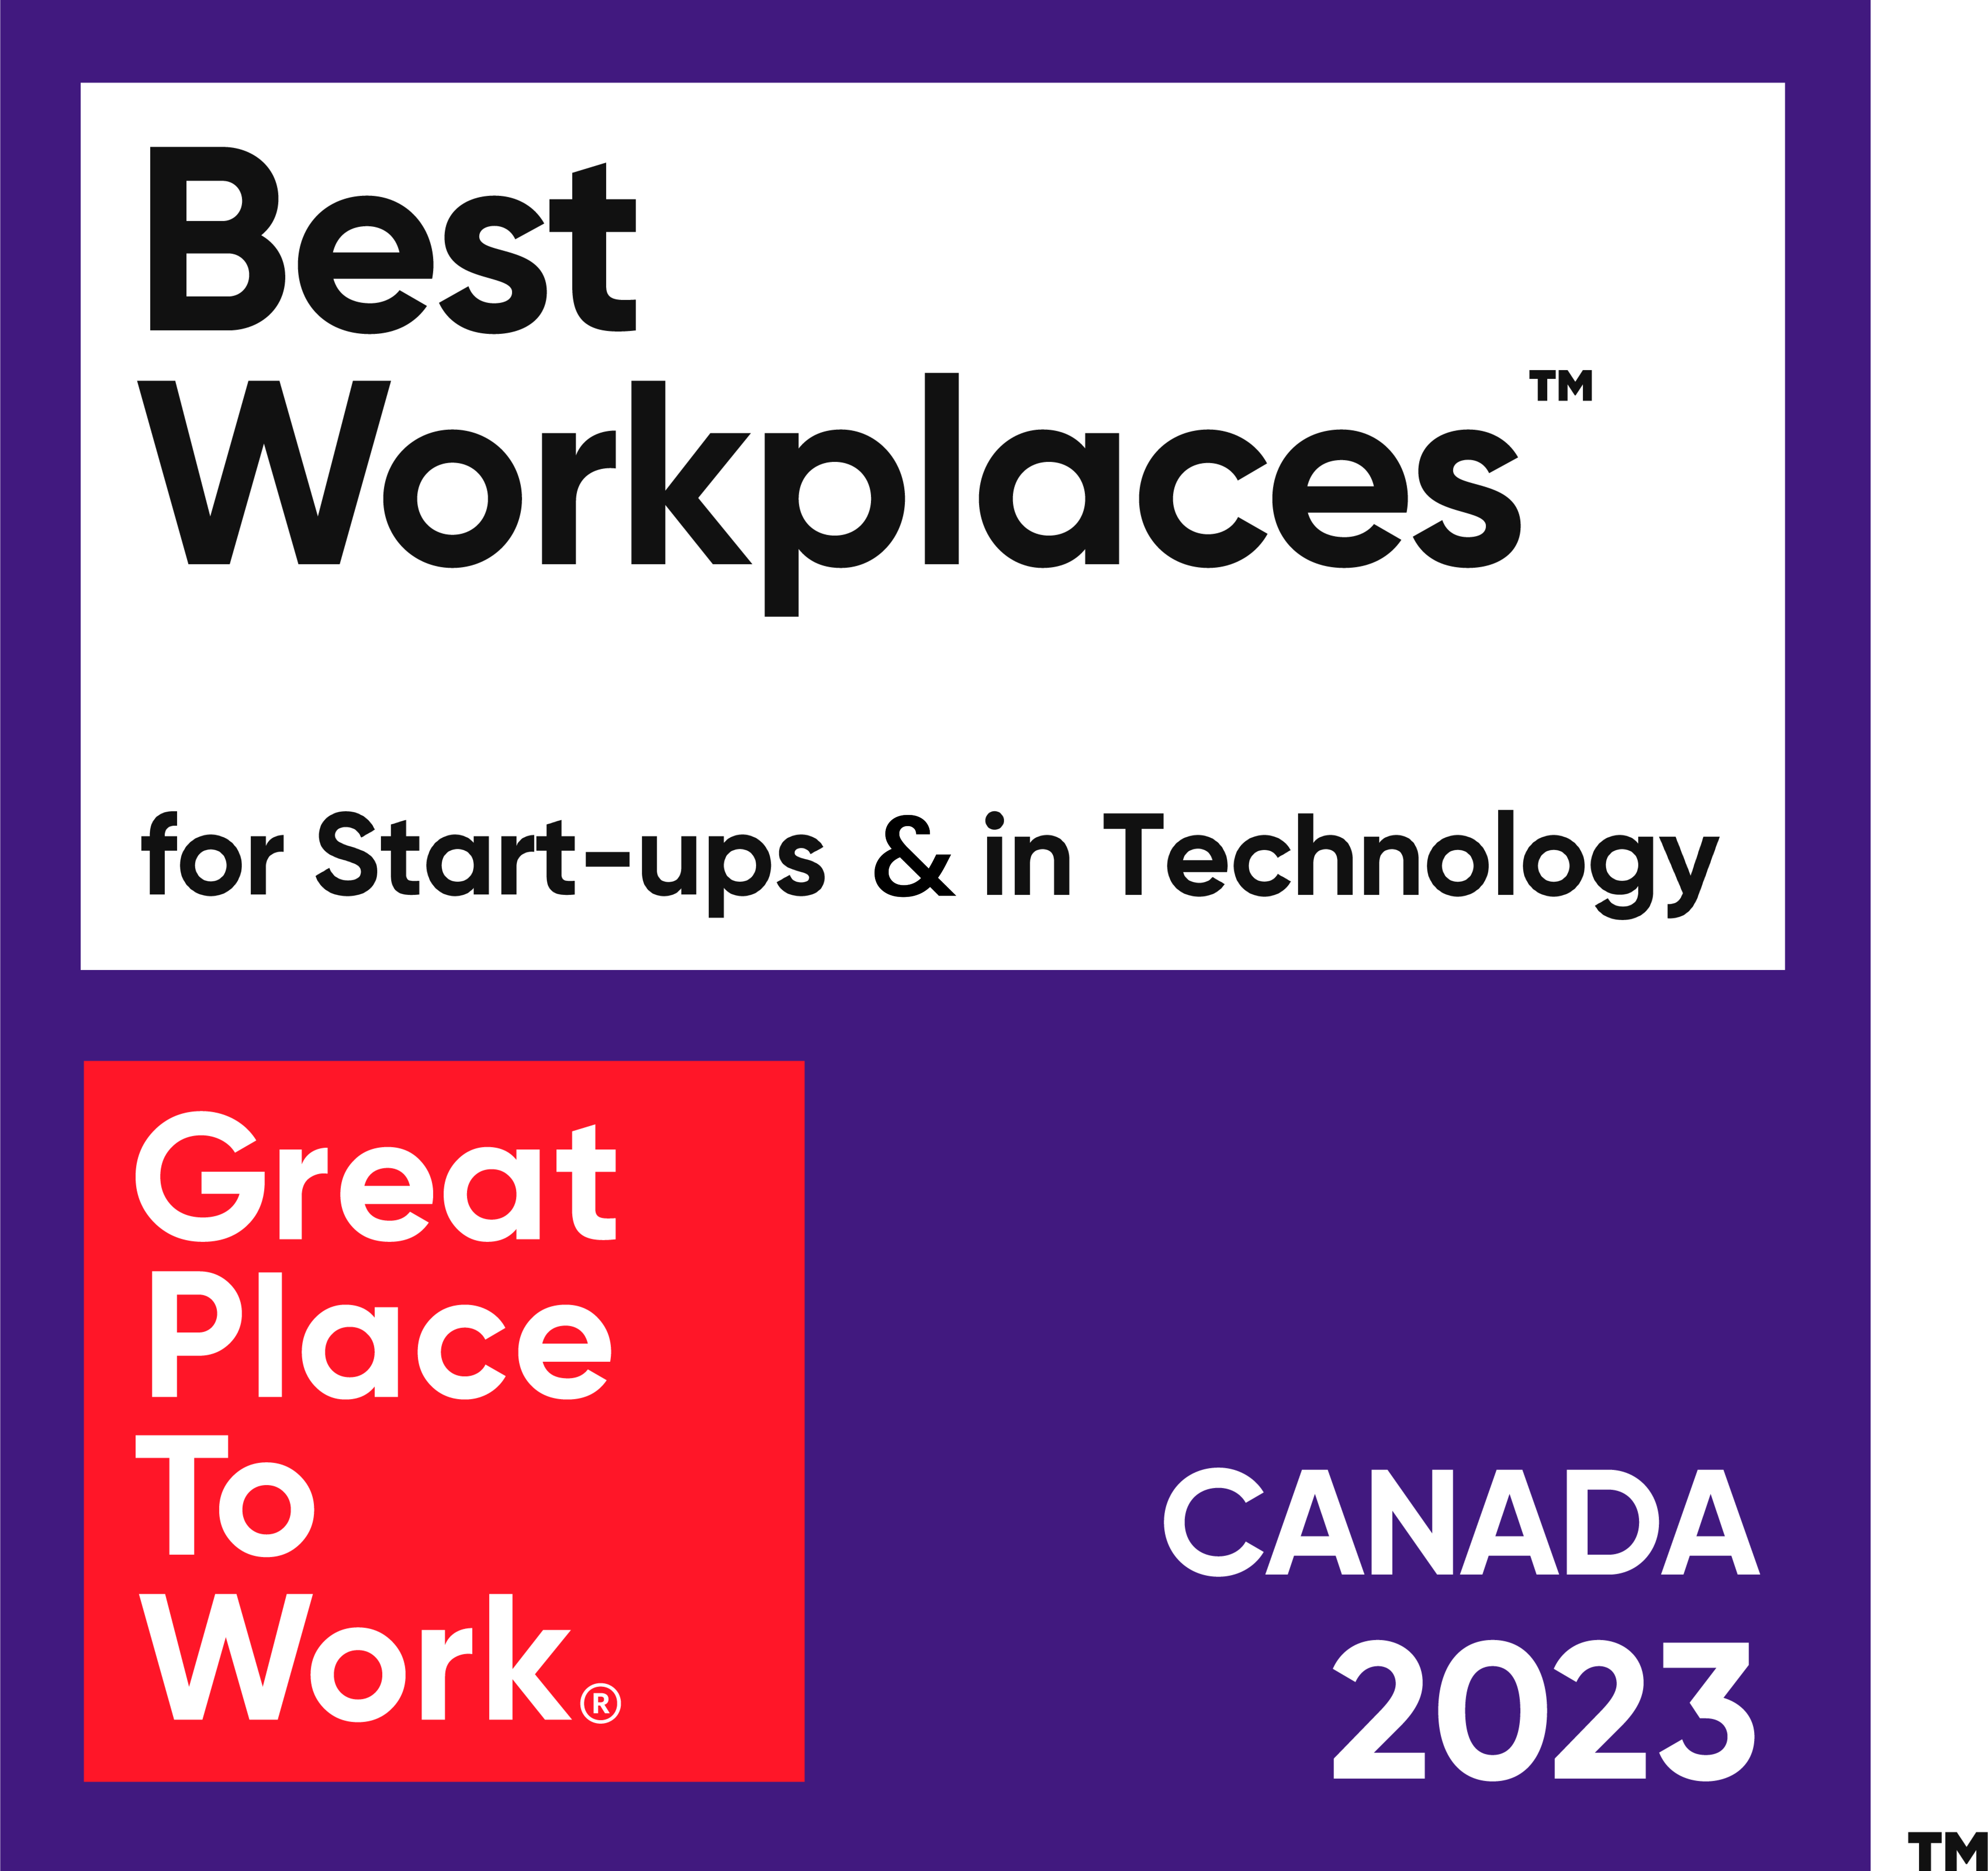 Great Place to Work - Best Workplaces for Startups and Technology Canada 2023 Award